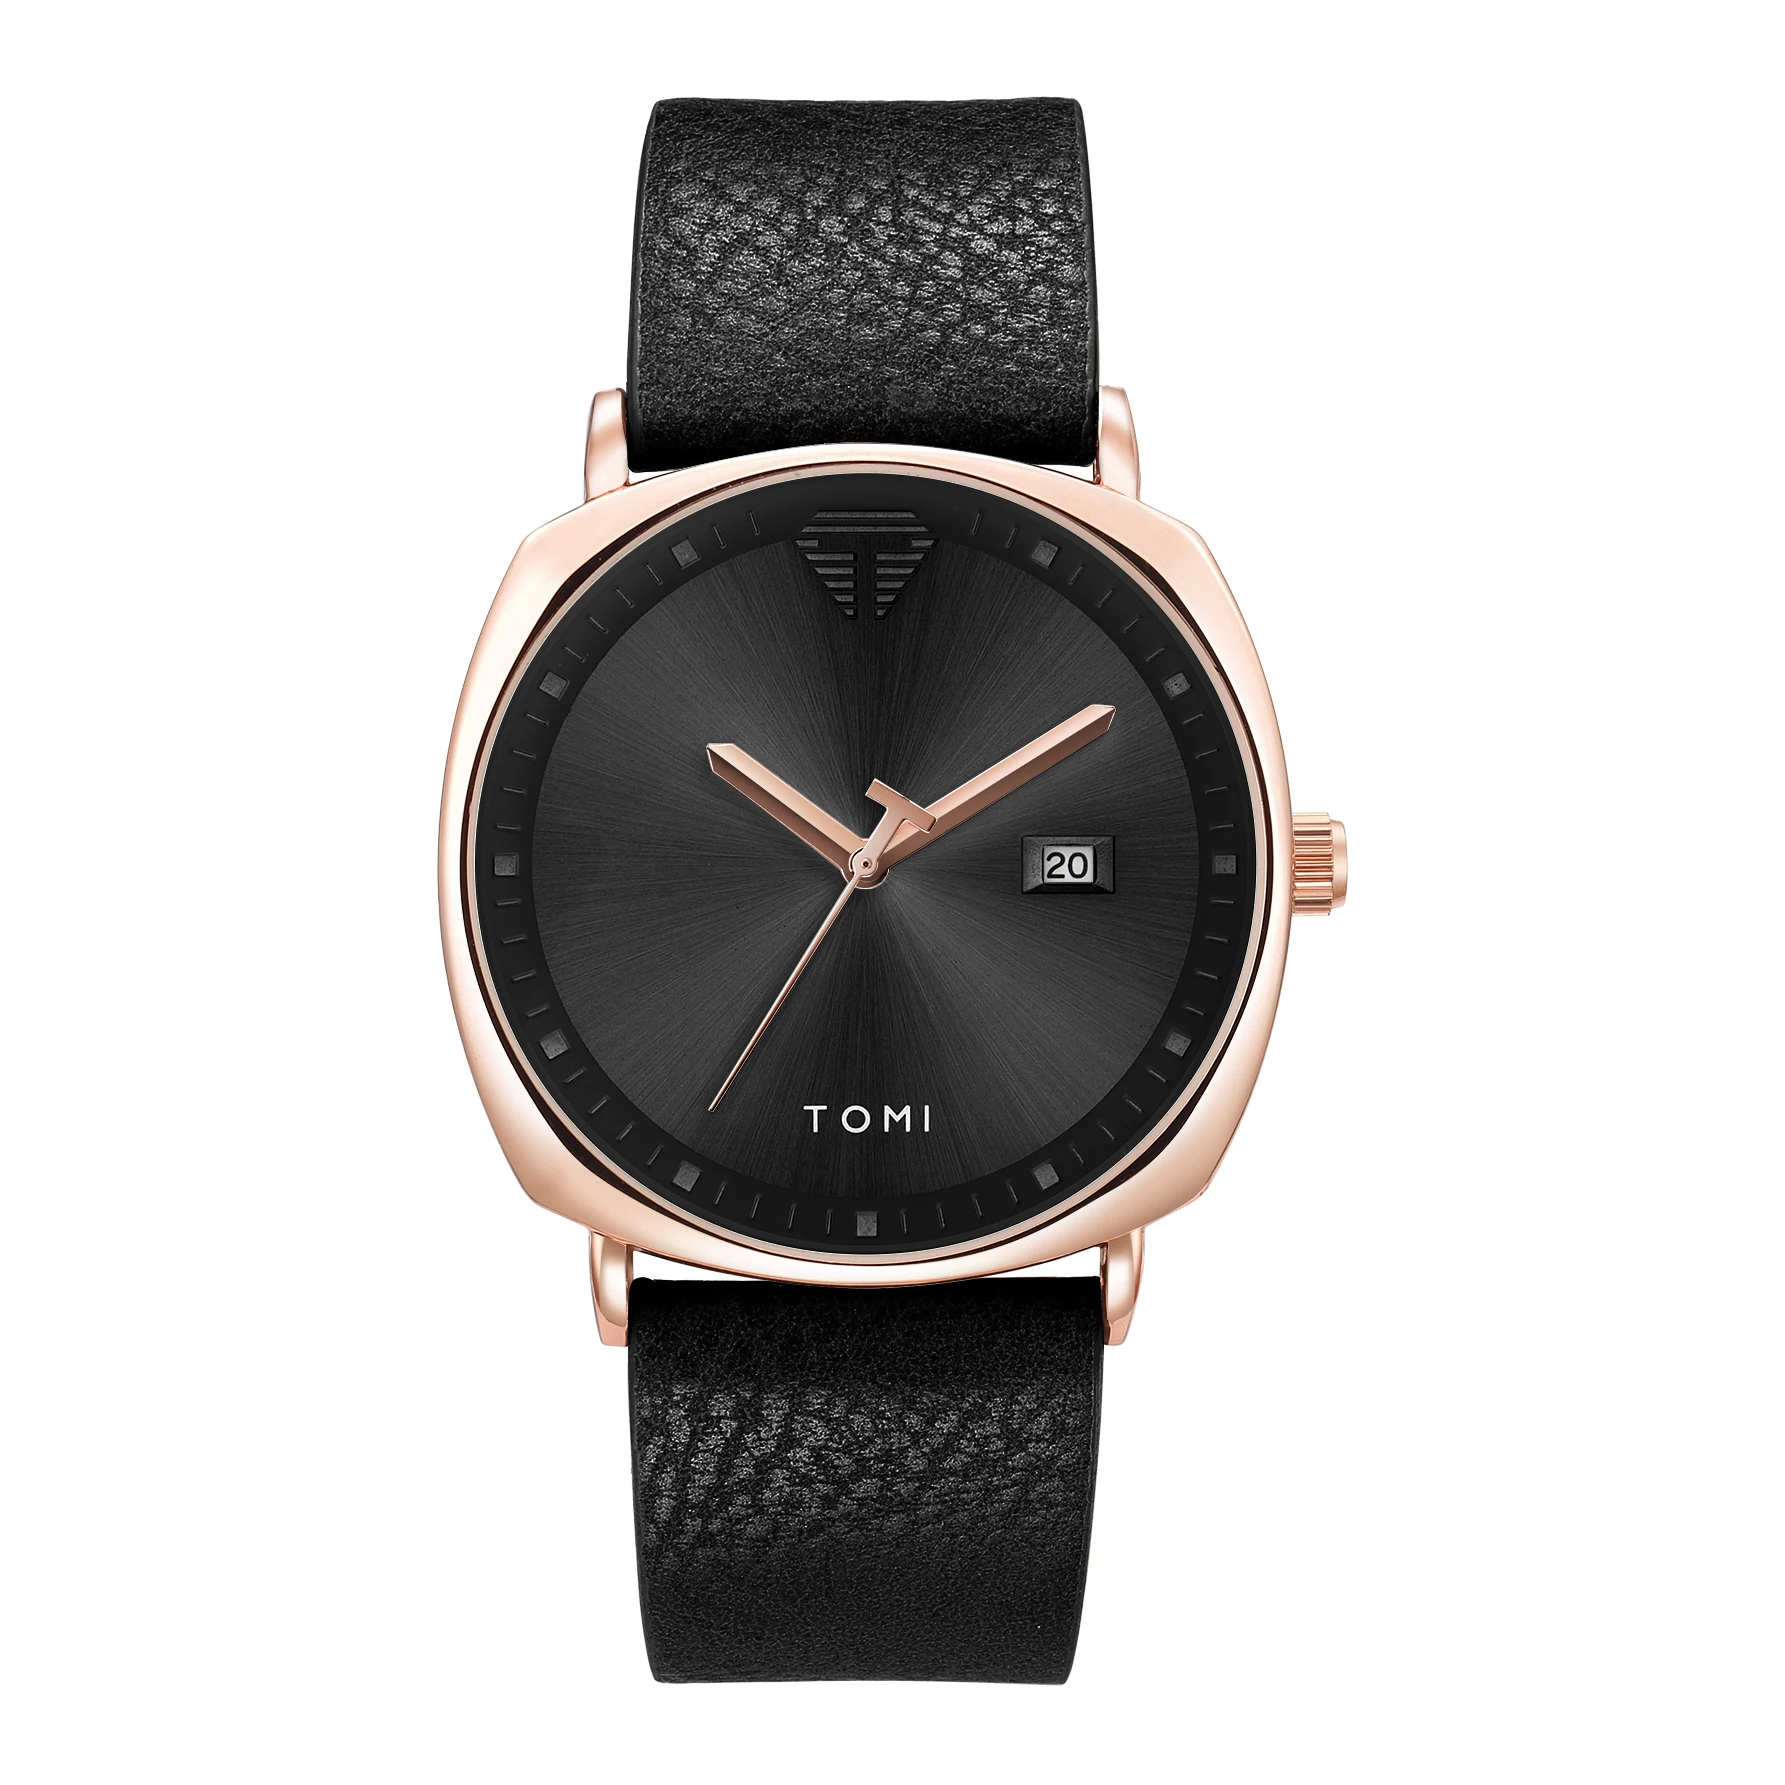 Mens Cool  Casual Watch Men Quartz Watches Simple Relogio Masculine Silicone Strap Watch Minimalist Women Clock Best Gifts cool skull nature bamboo watch men s wristwatch genuine leather strap roman numbers quartz clock novel wood watches best gifts